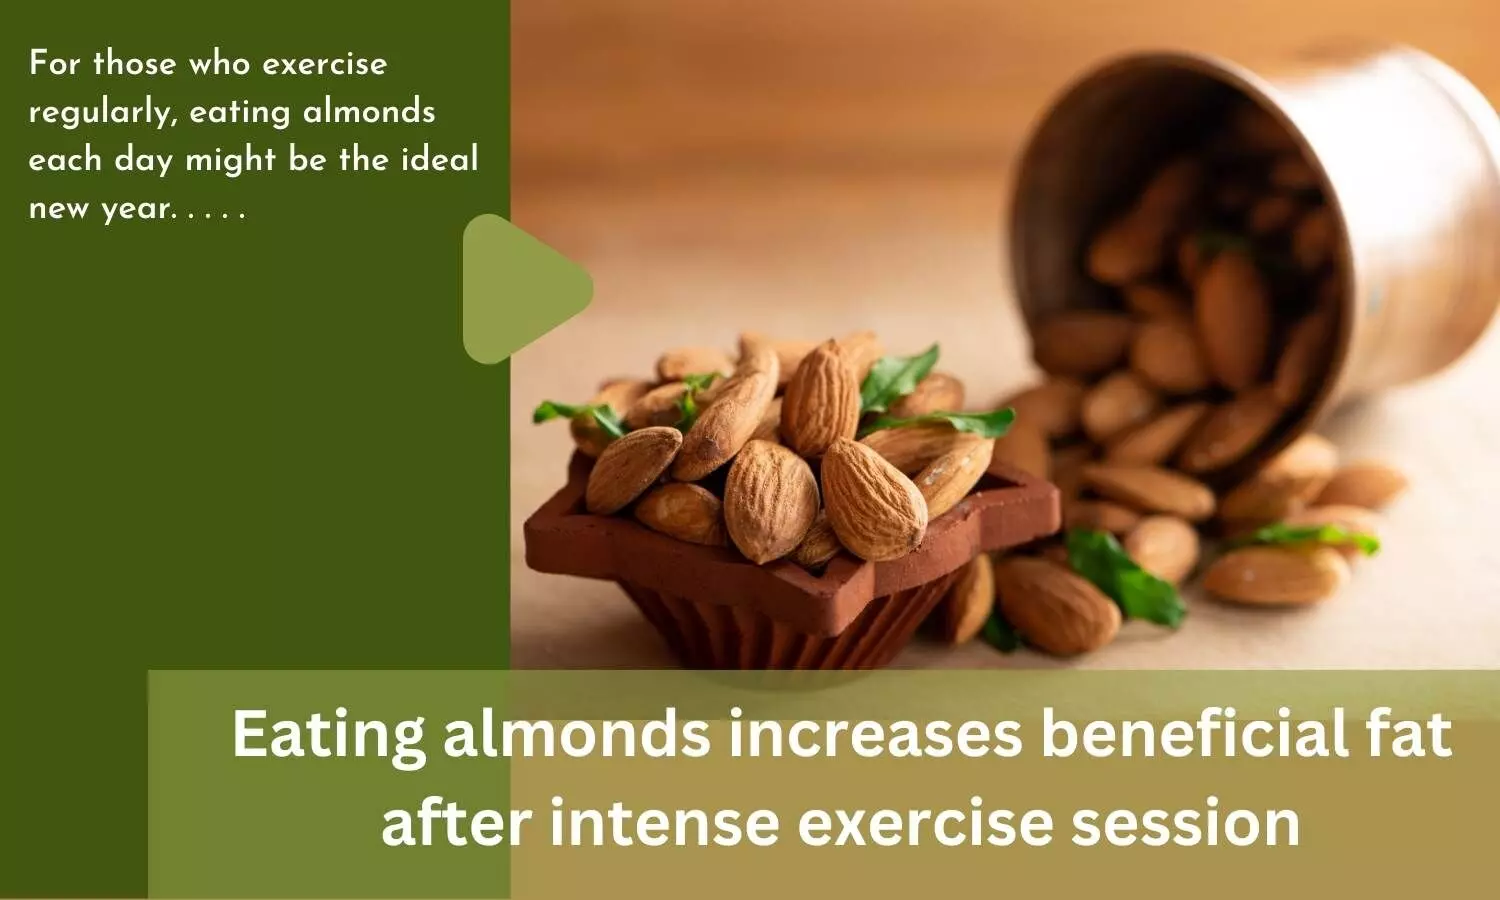 Eating almonds increases beneficial fat after intense exercise session